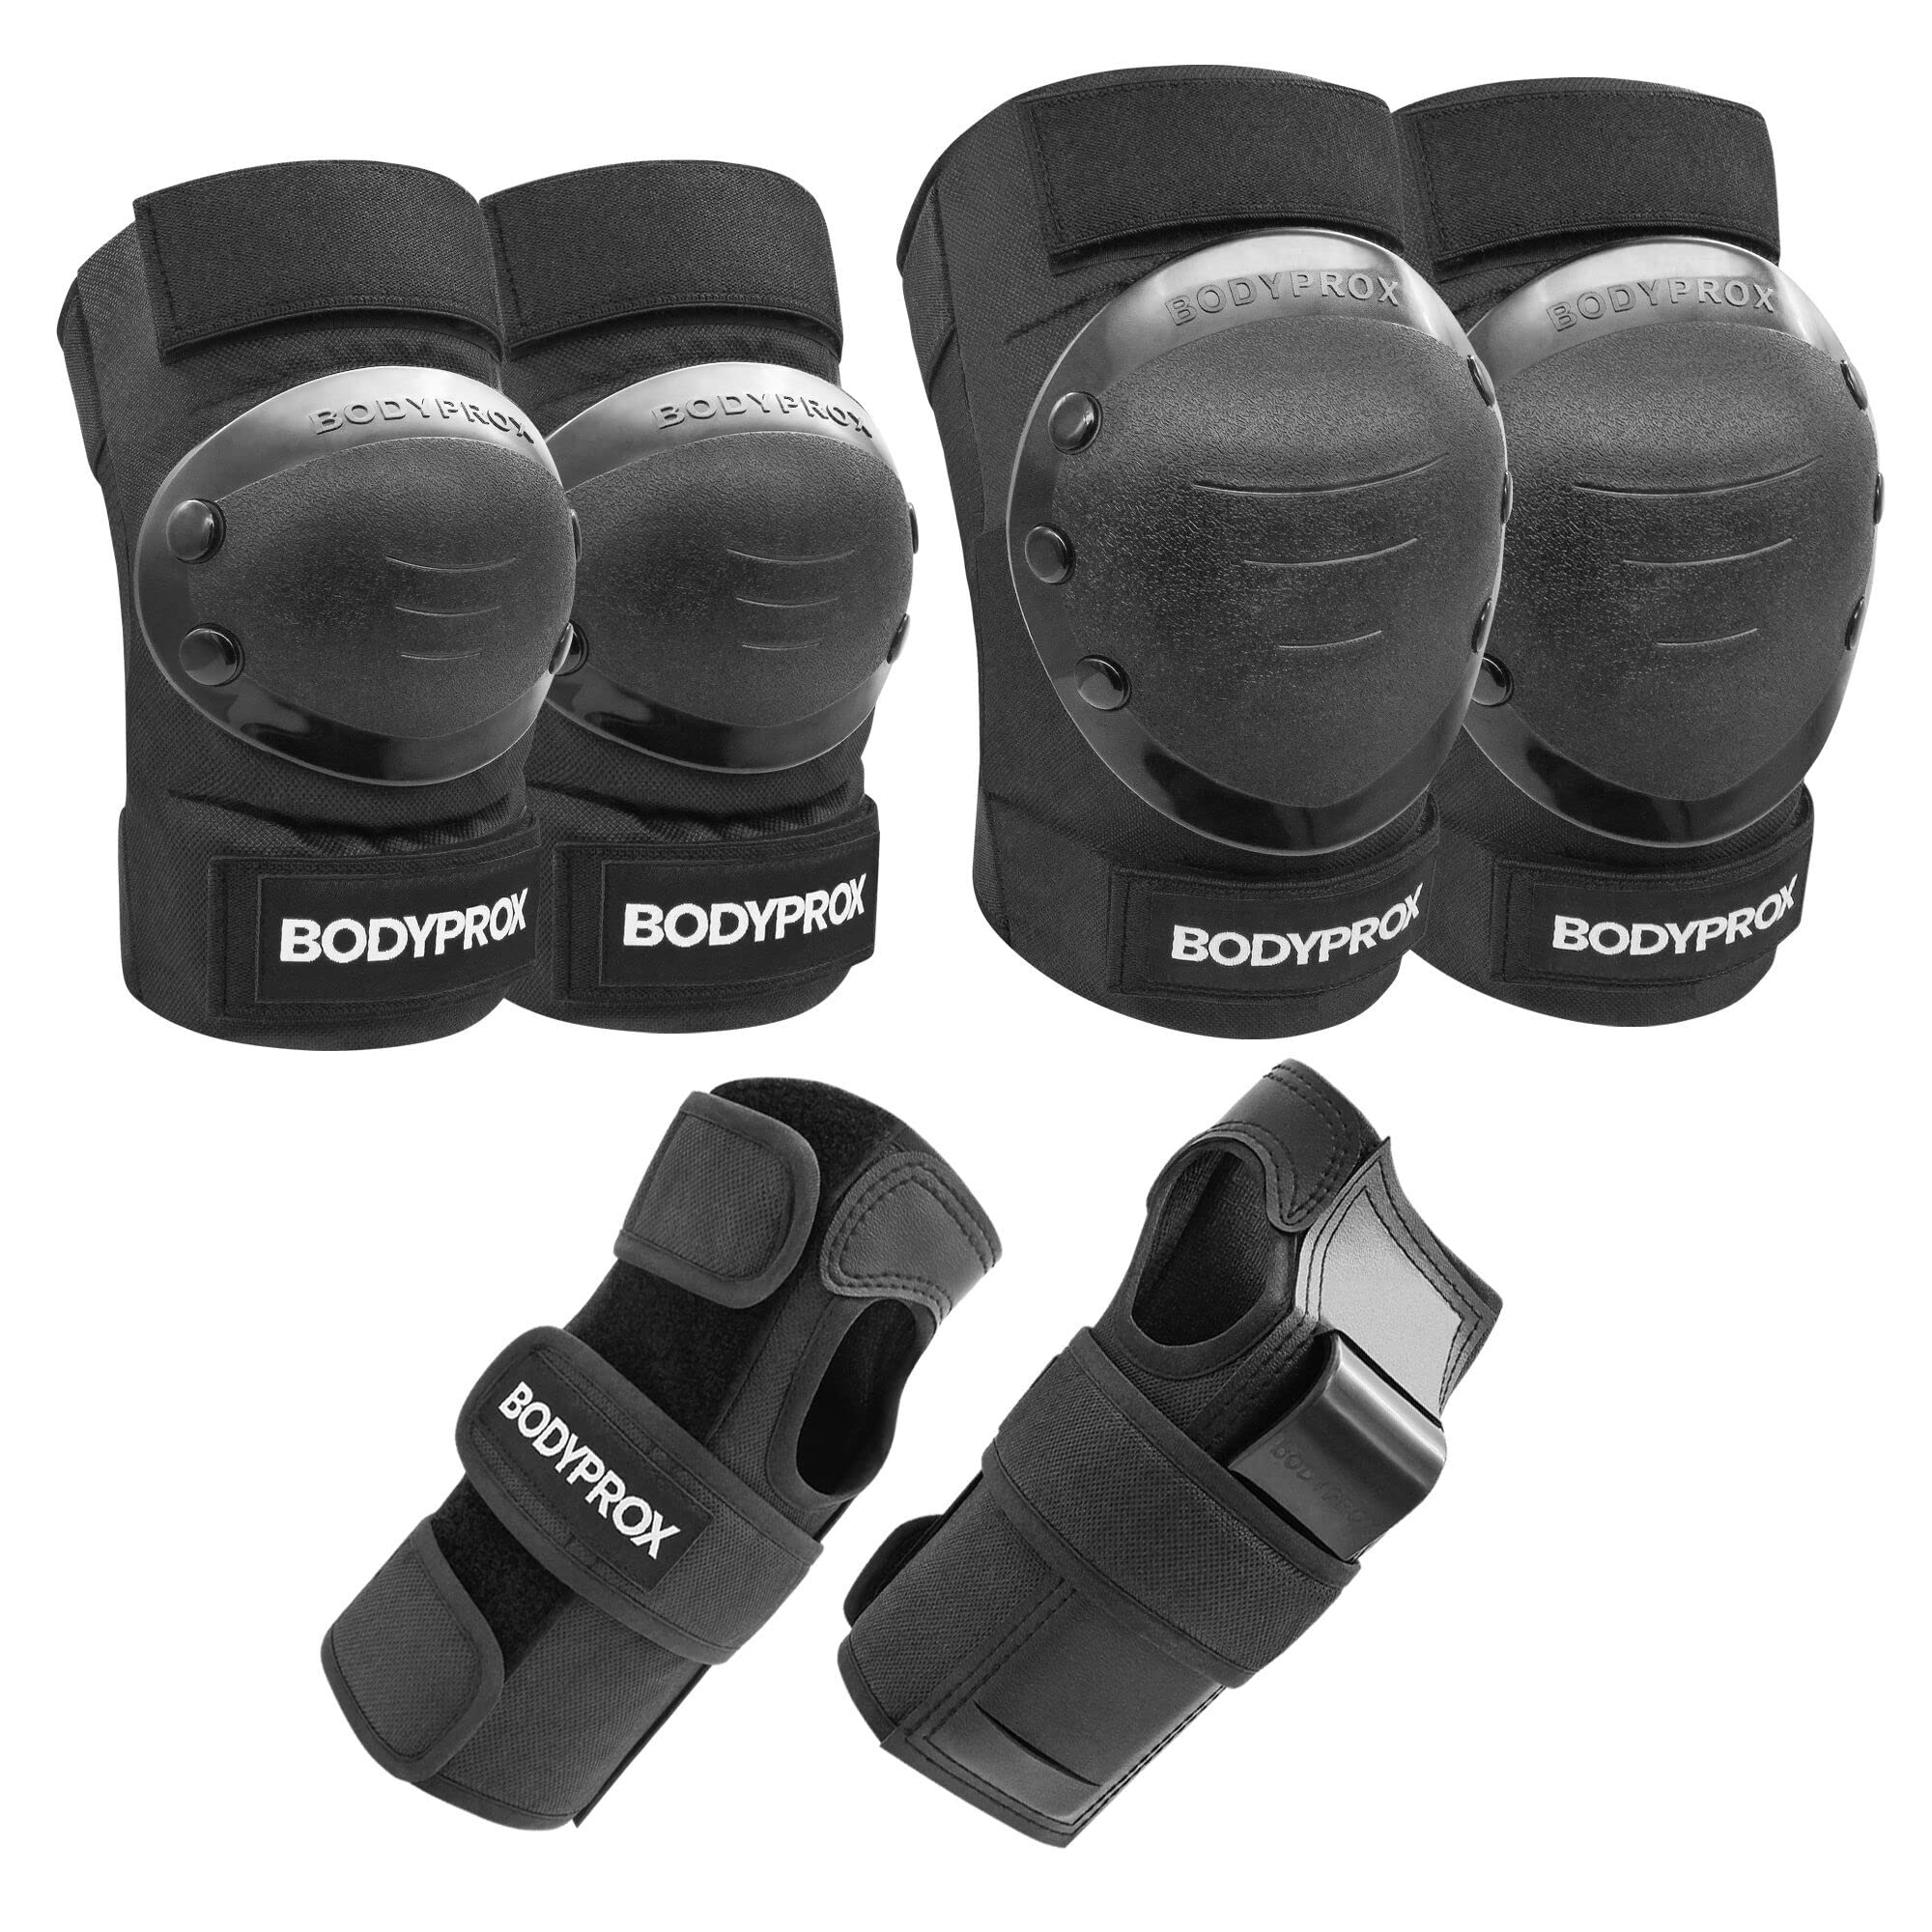 512 Nocry Bodyprox Sellstrom Kneepro Rexbeti Professional Knee Pads with  Heavy Duty Foam Padding & Safety Goggles - China Knee Pads, Elbow Pads